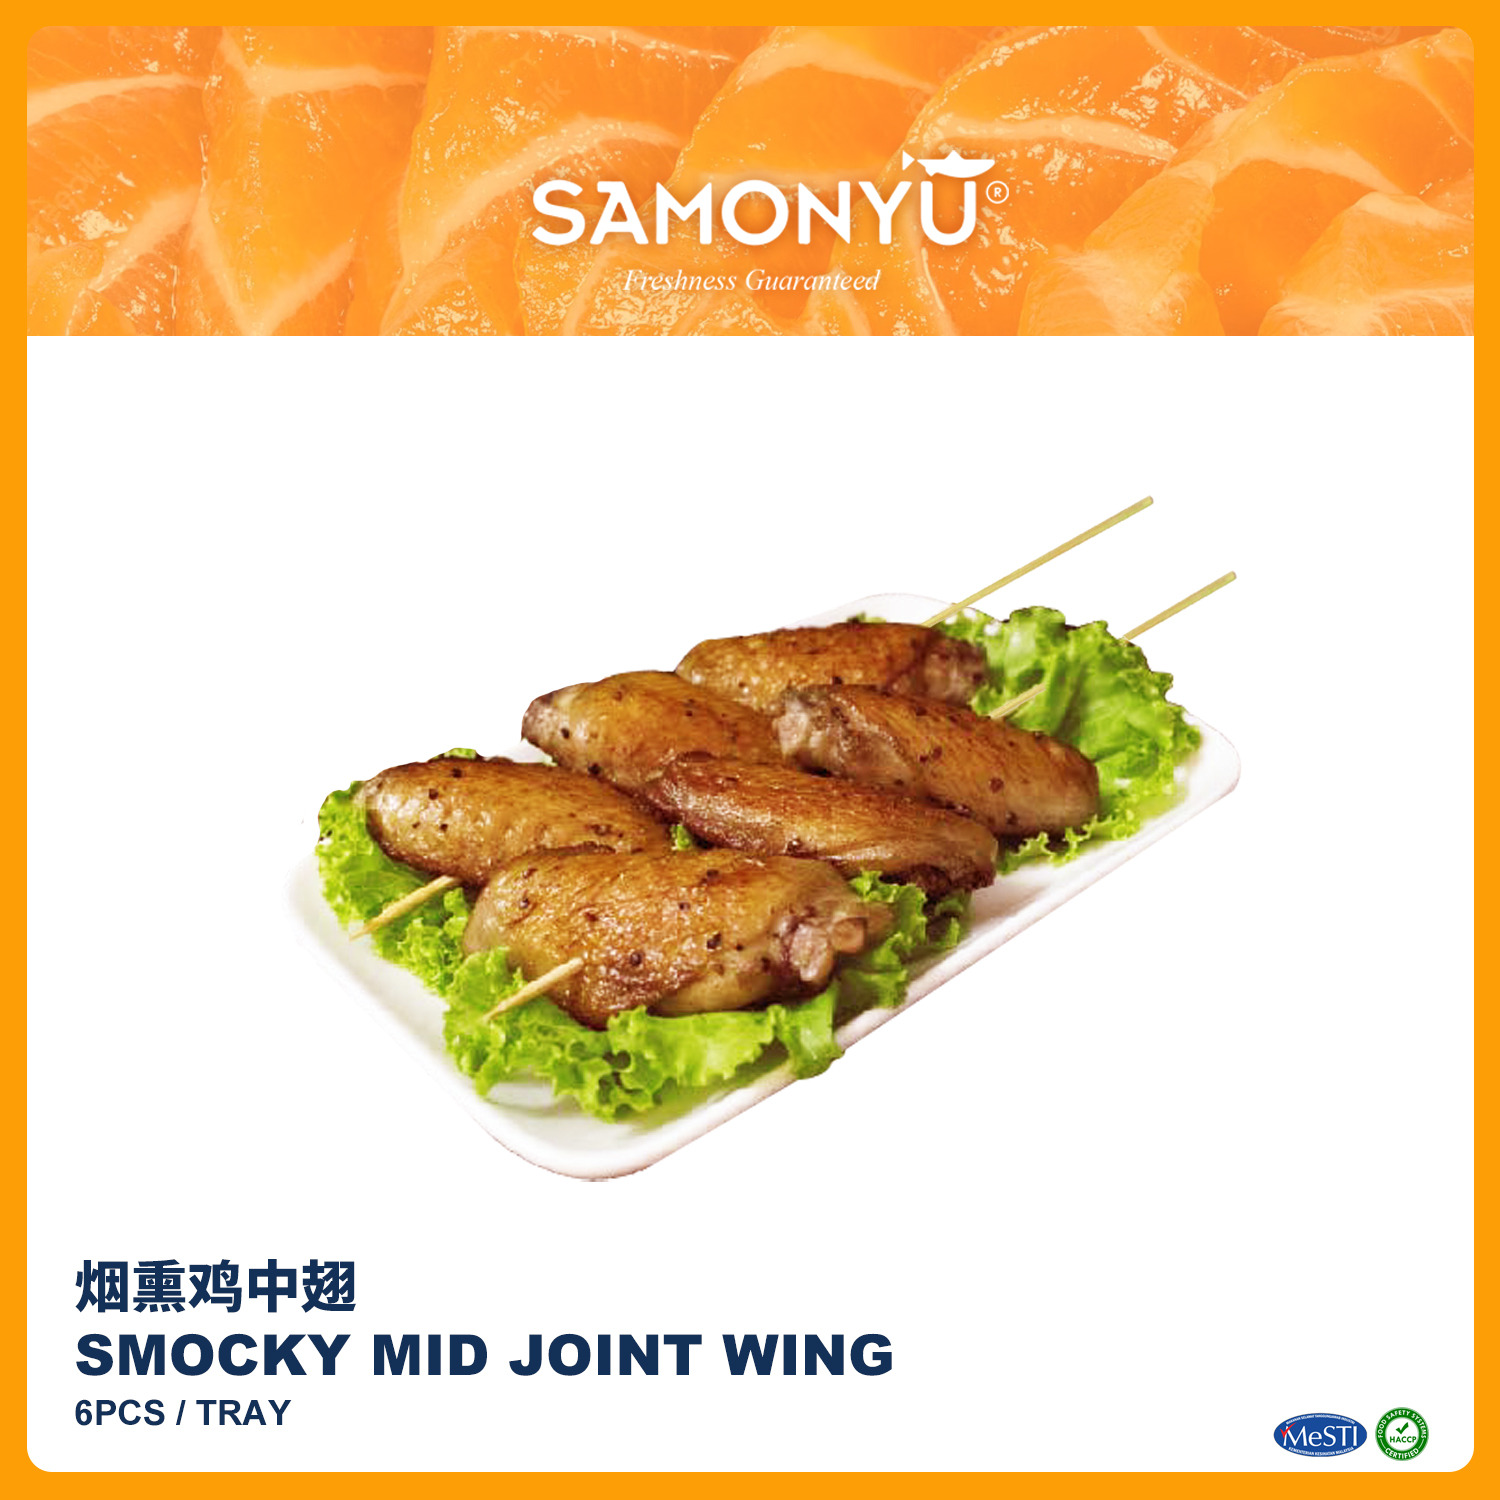 SMOKY MID JOINT WING 烟熏鸡中翅